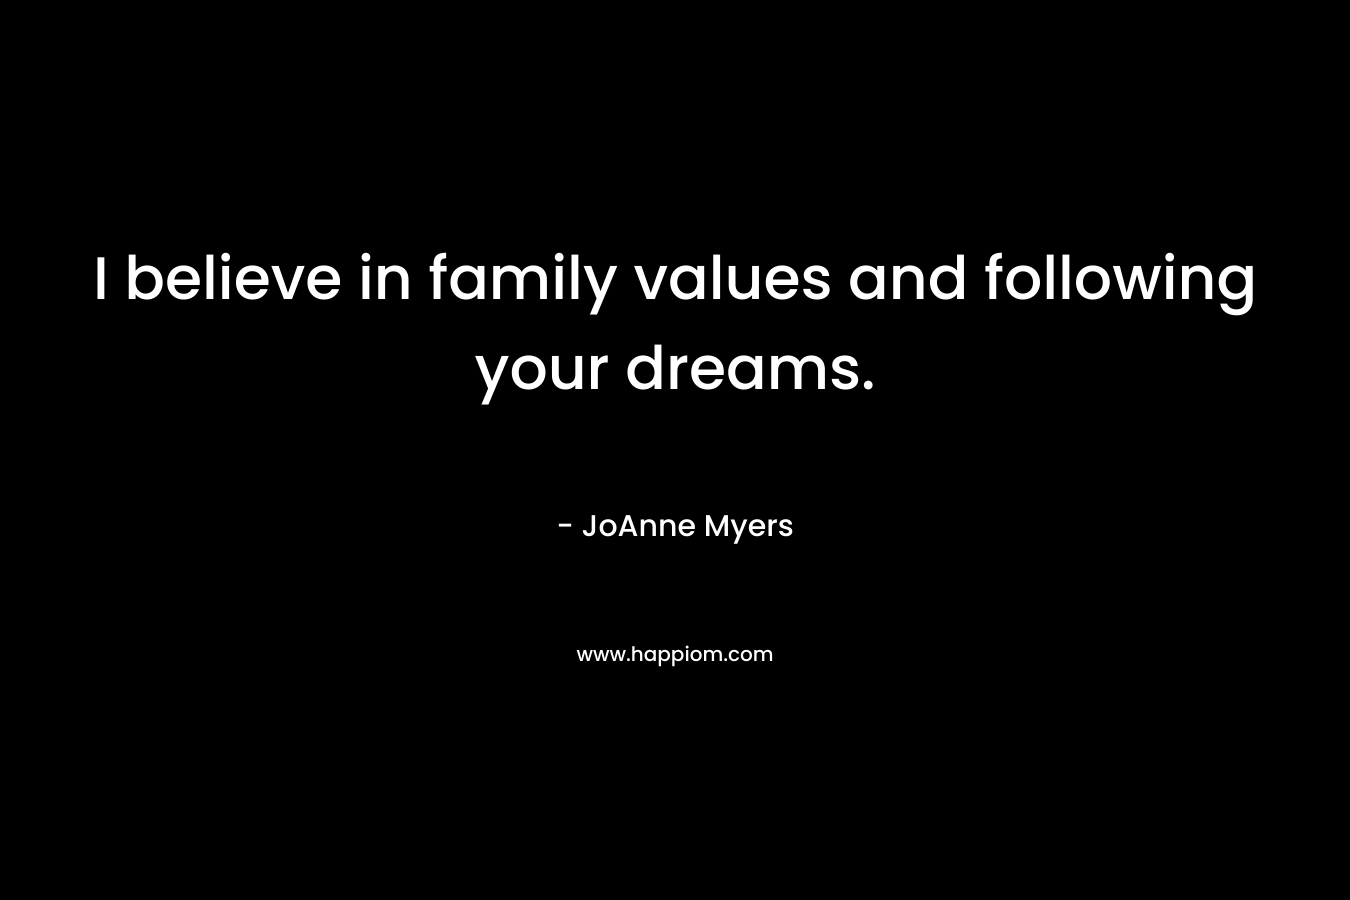 I believe in family values and following your dreams. – JoAnne Myers